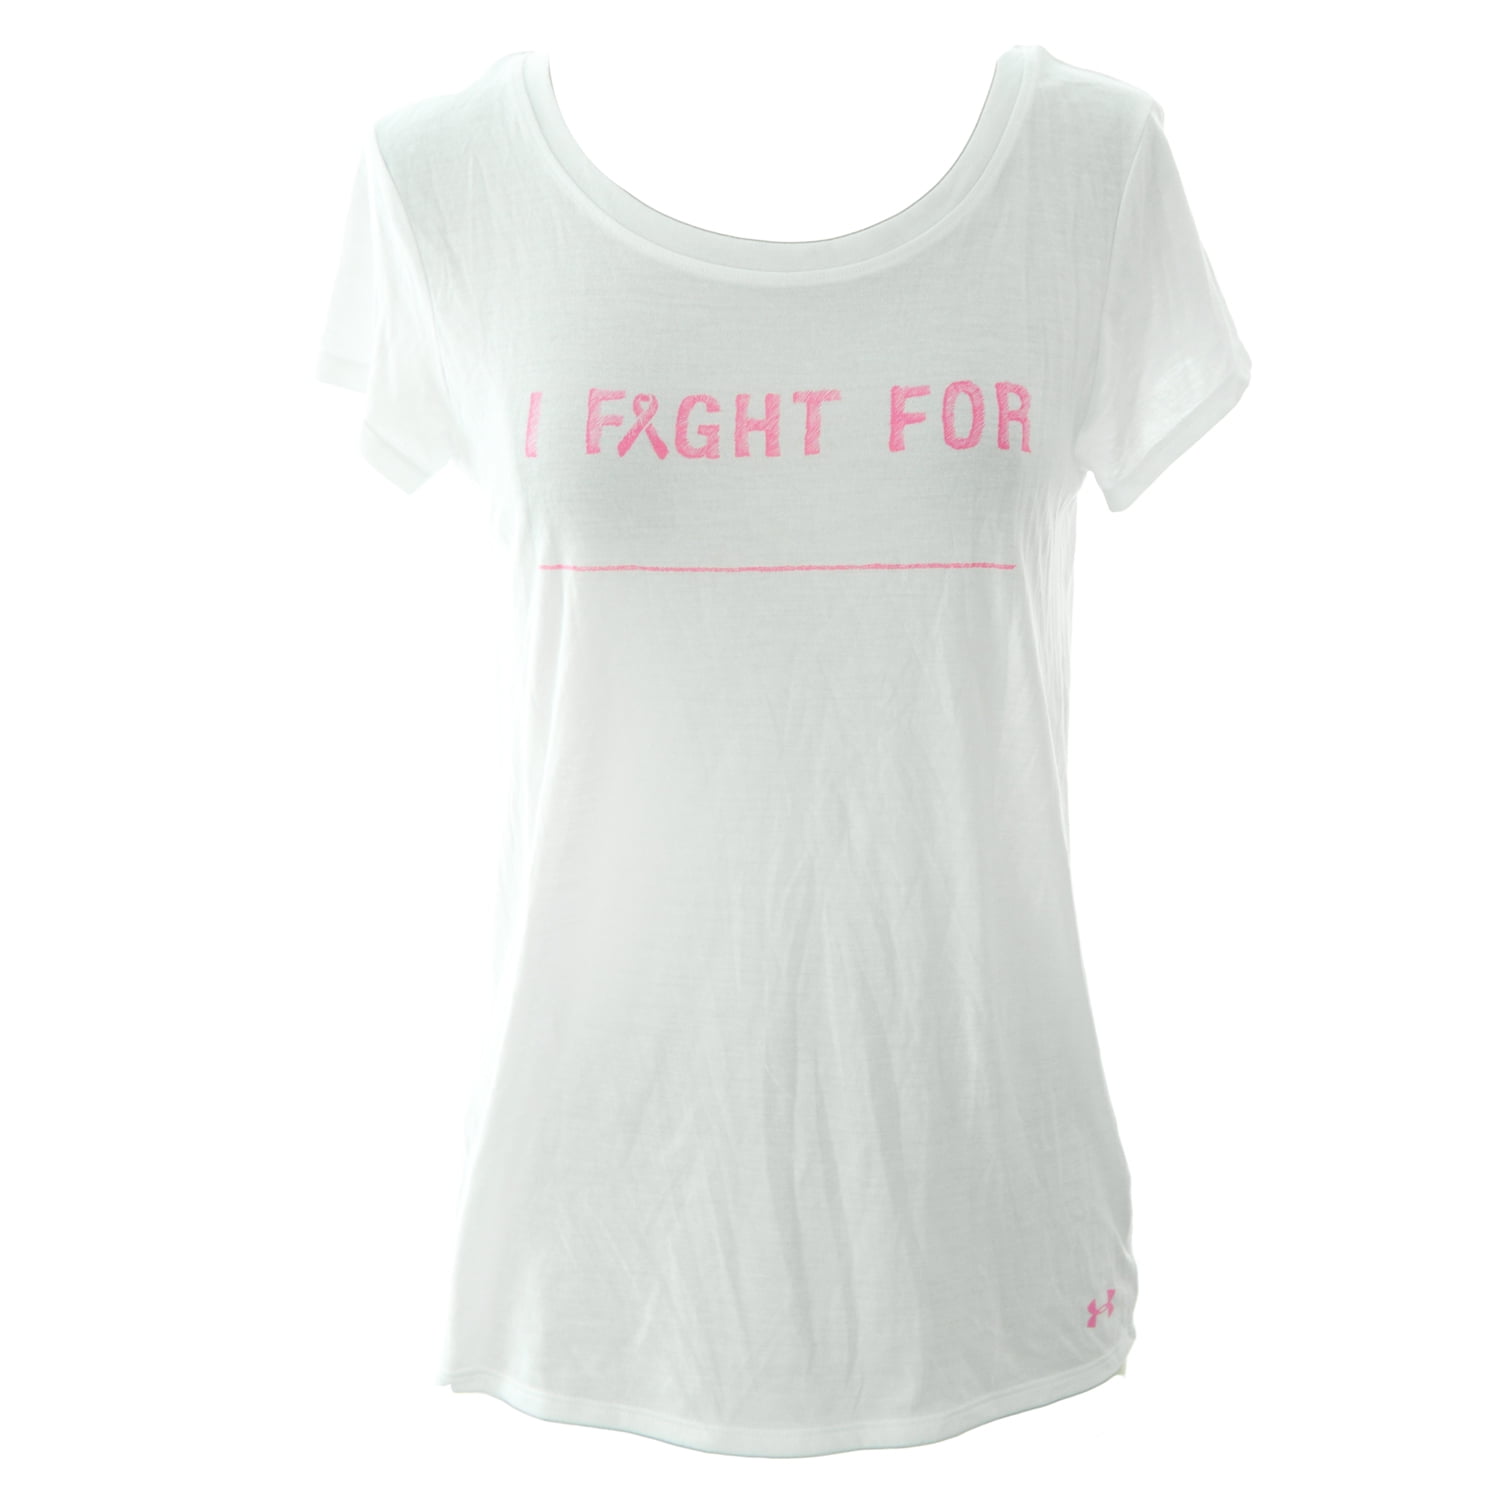 Se asemeja Rancio impermeable Under Armour Women's Power in Pink "I Fight For" T-Shirt Large White -  Walmart.com